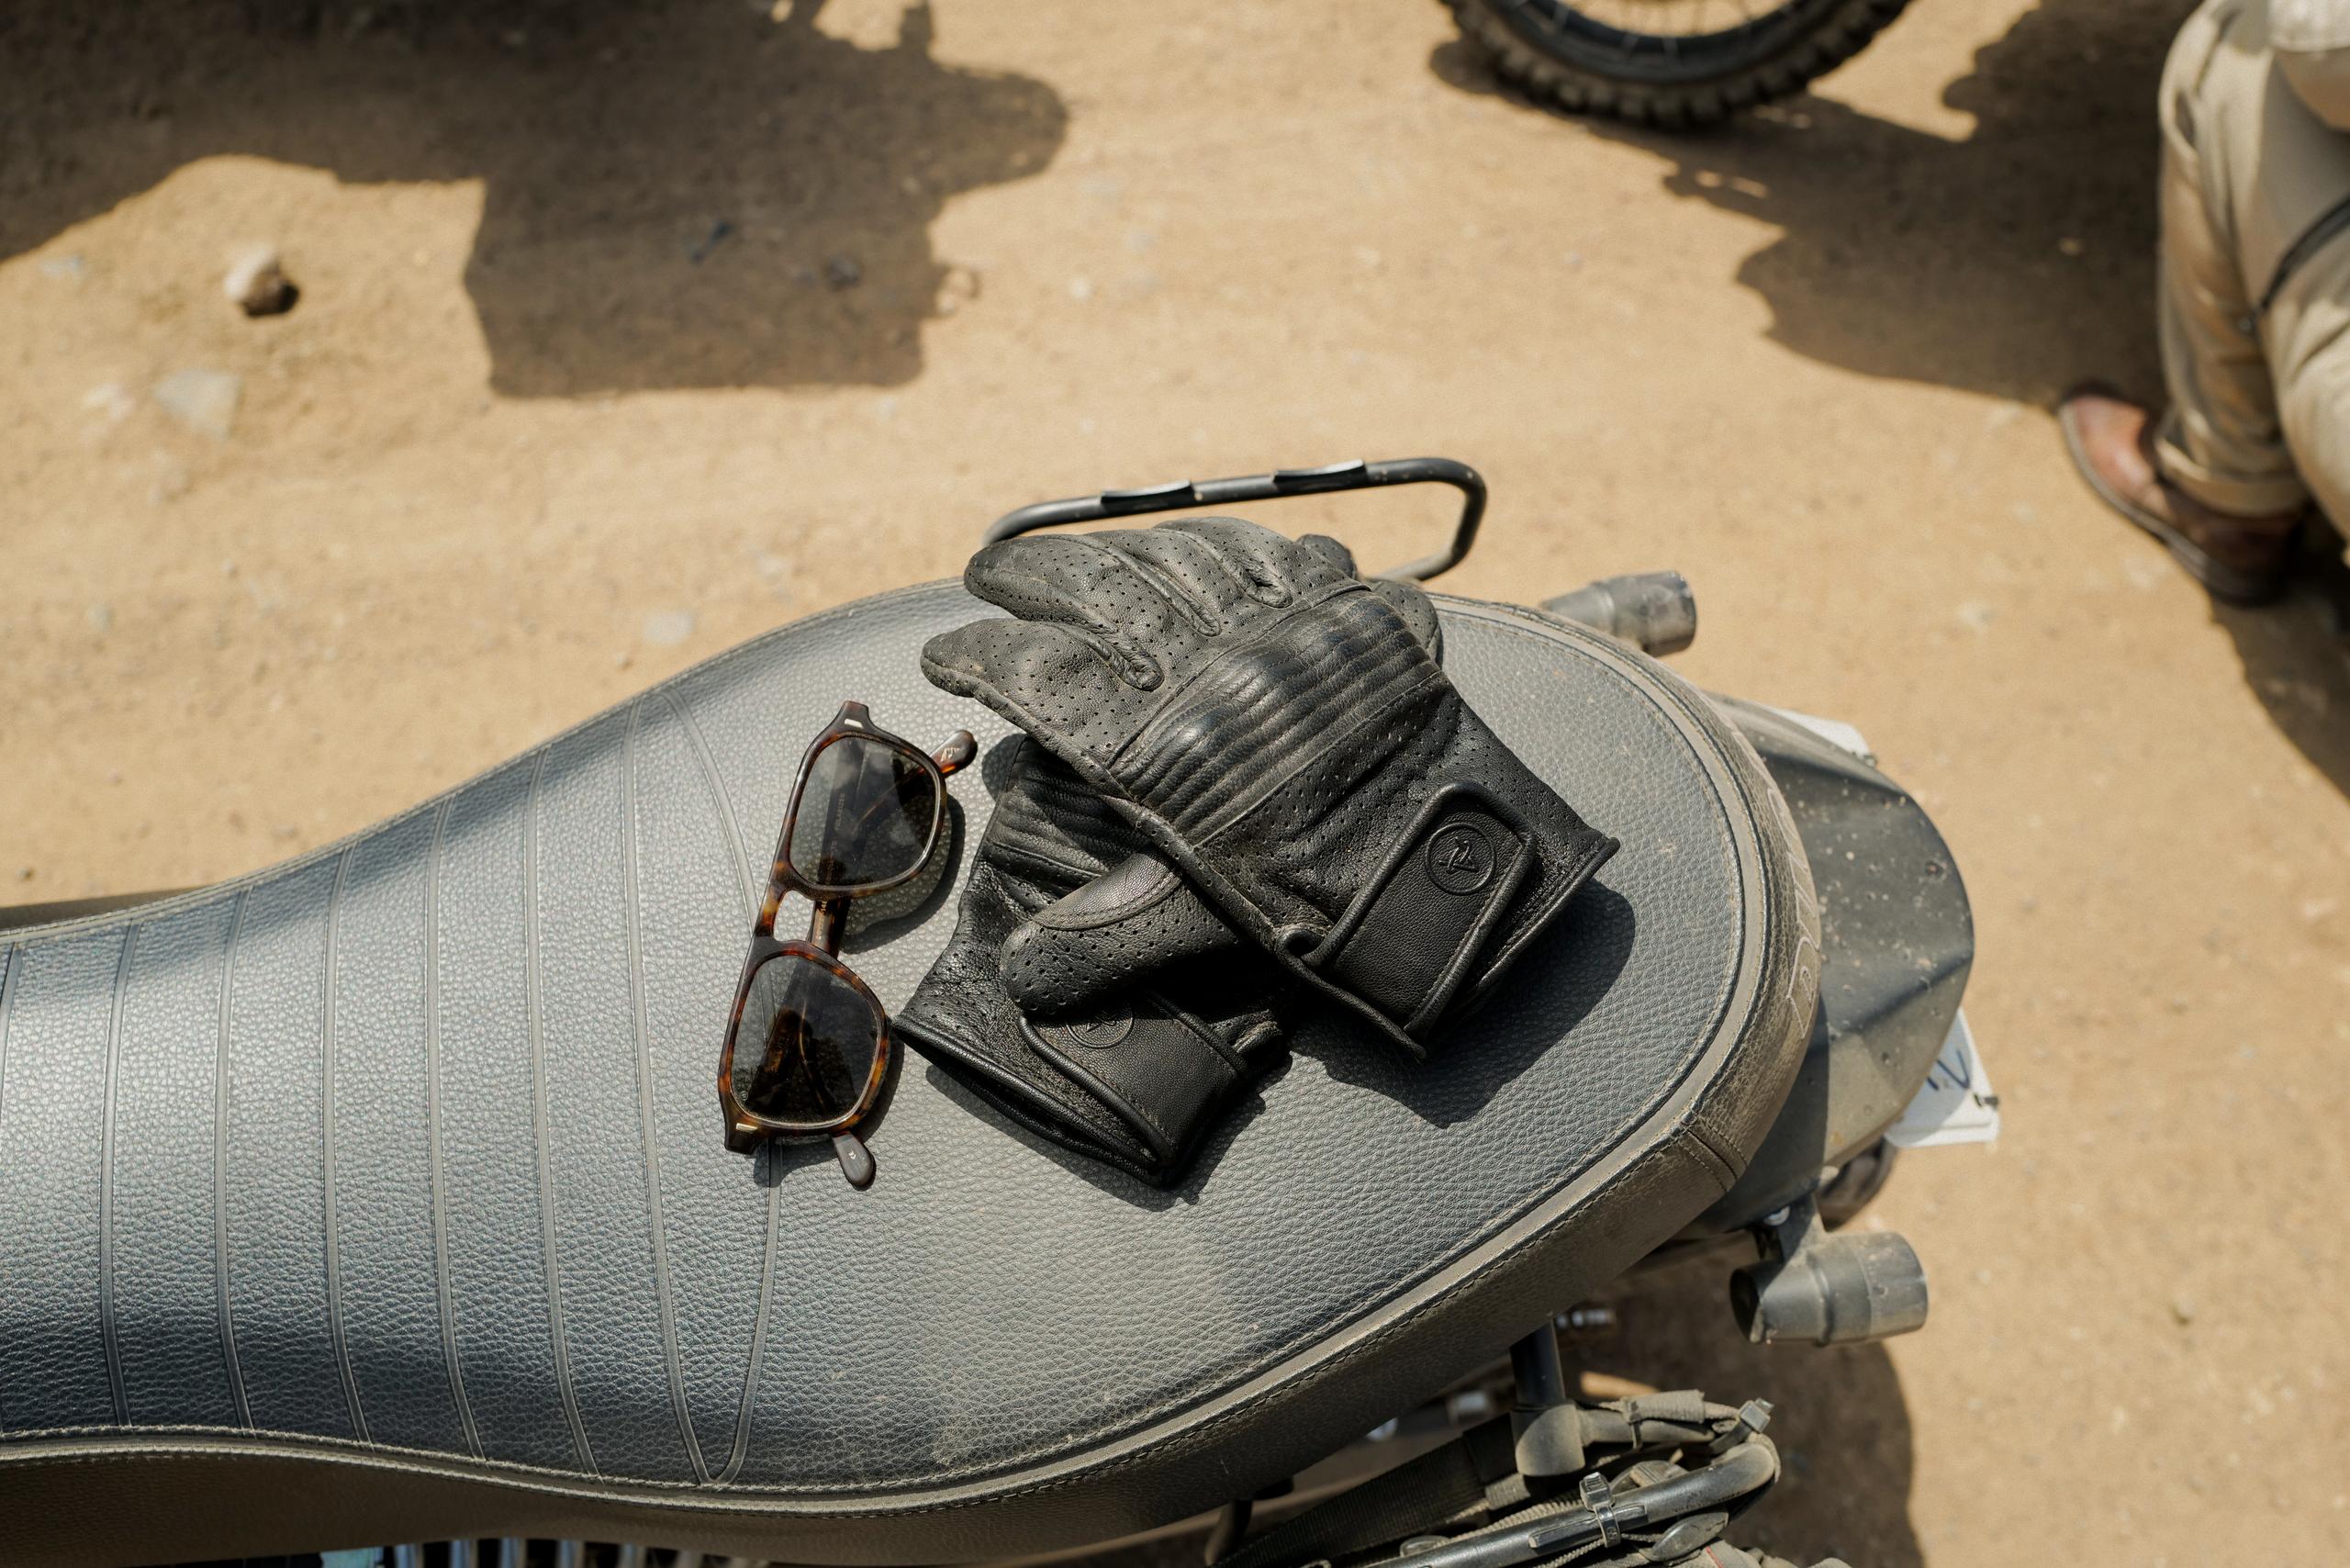 Top view of AETHER moto gloves and AETHER sunglasses on motorcycle seat